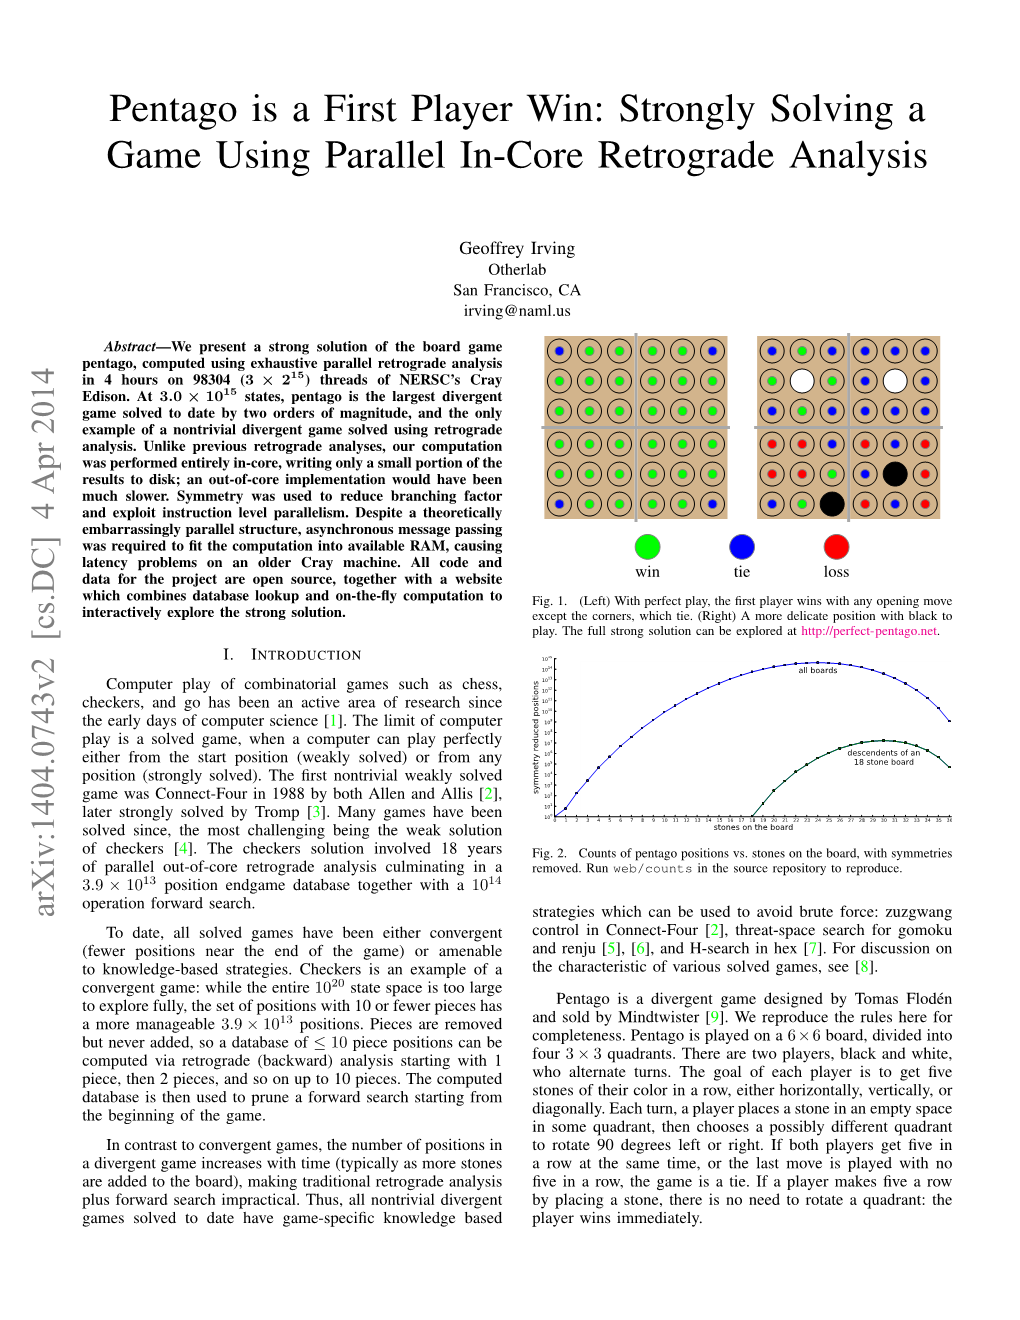 Pentago Is a First Player Win: Strongly Solving a Game Using Parallel In-Core Retrograde Analysis